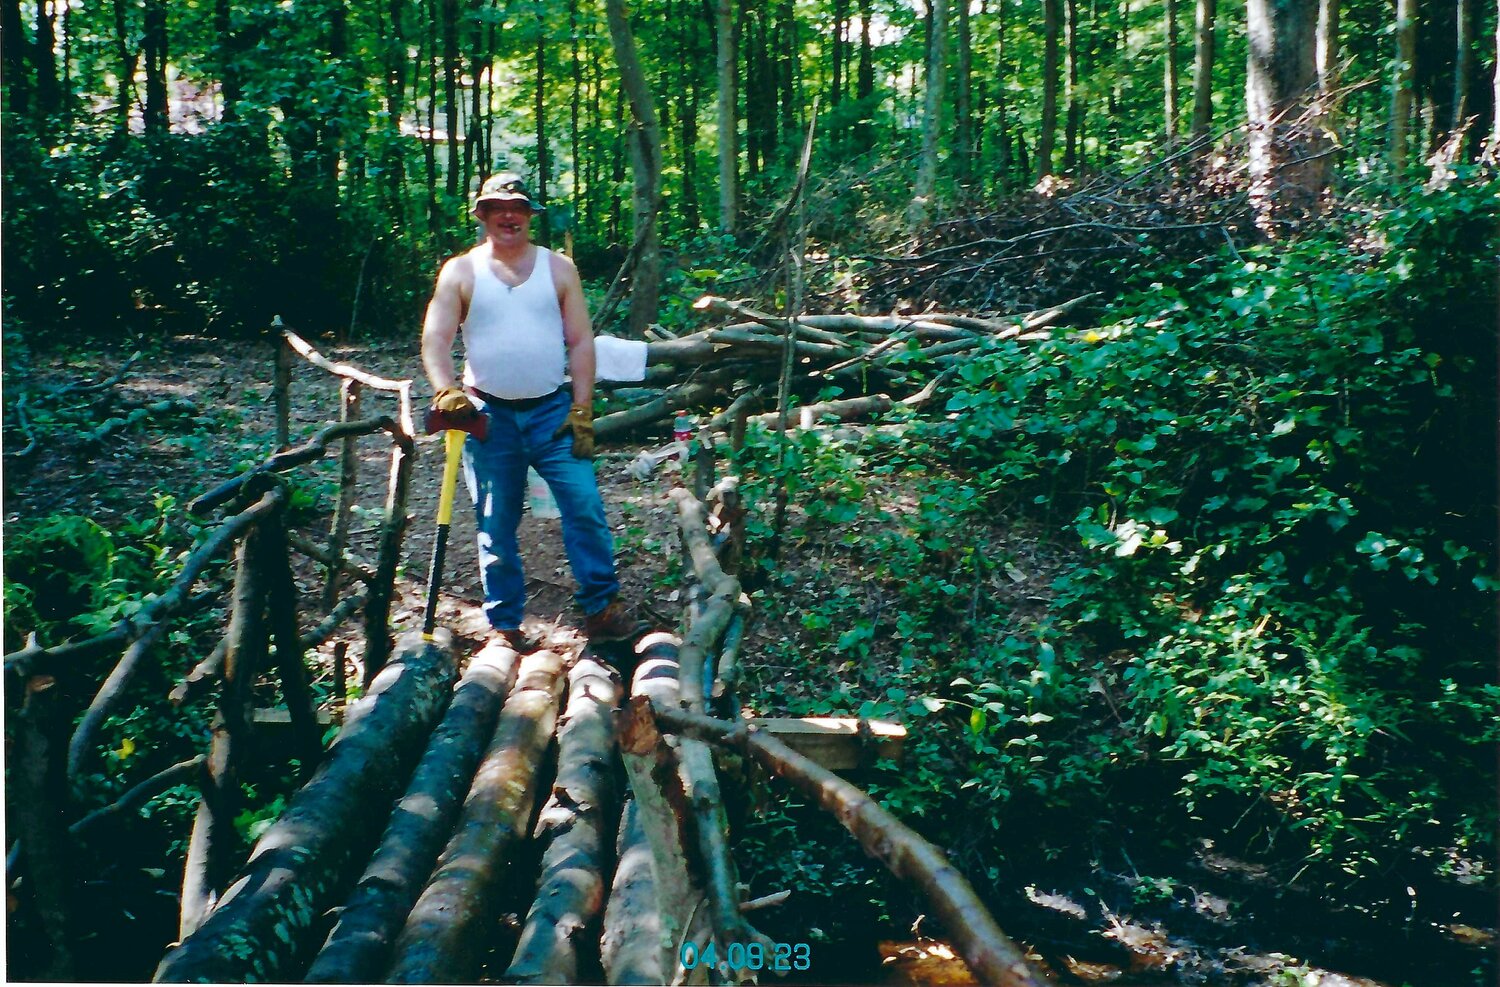 Paul Dziedzic, one of the eight siblings who grew up on the property, on a bridge he constructed years ago.